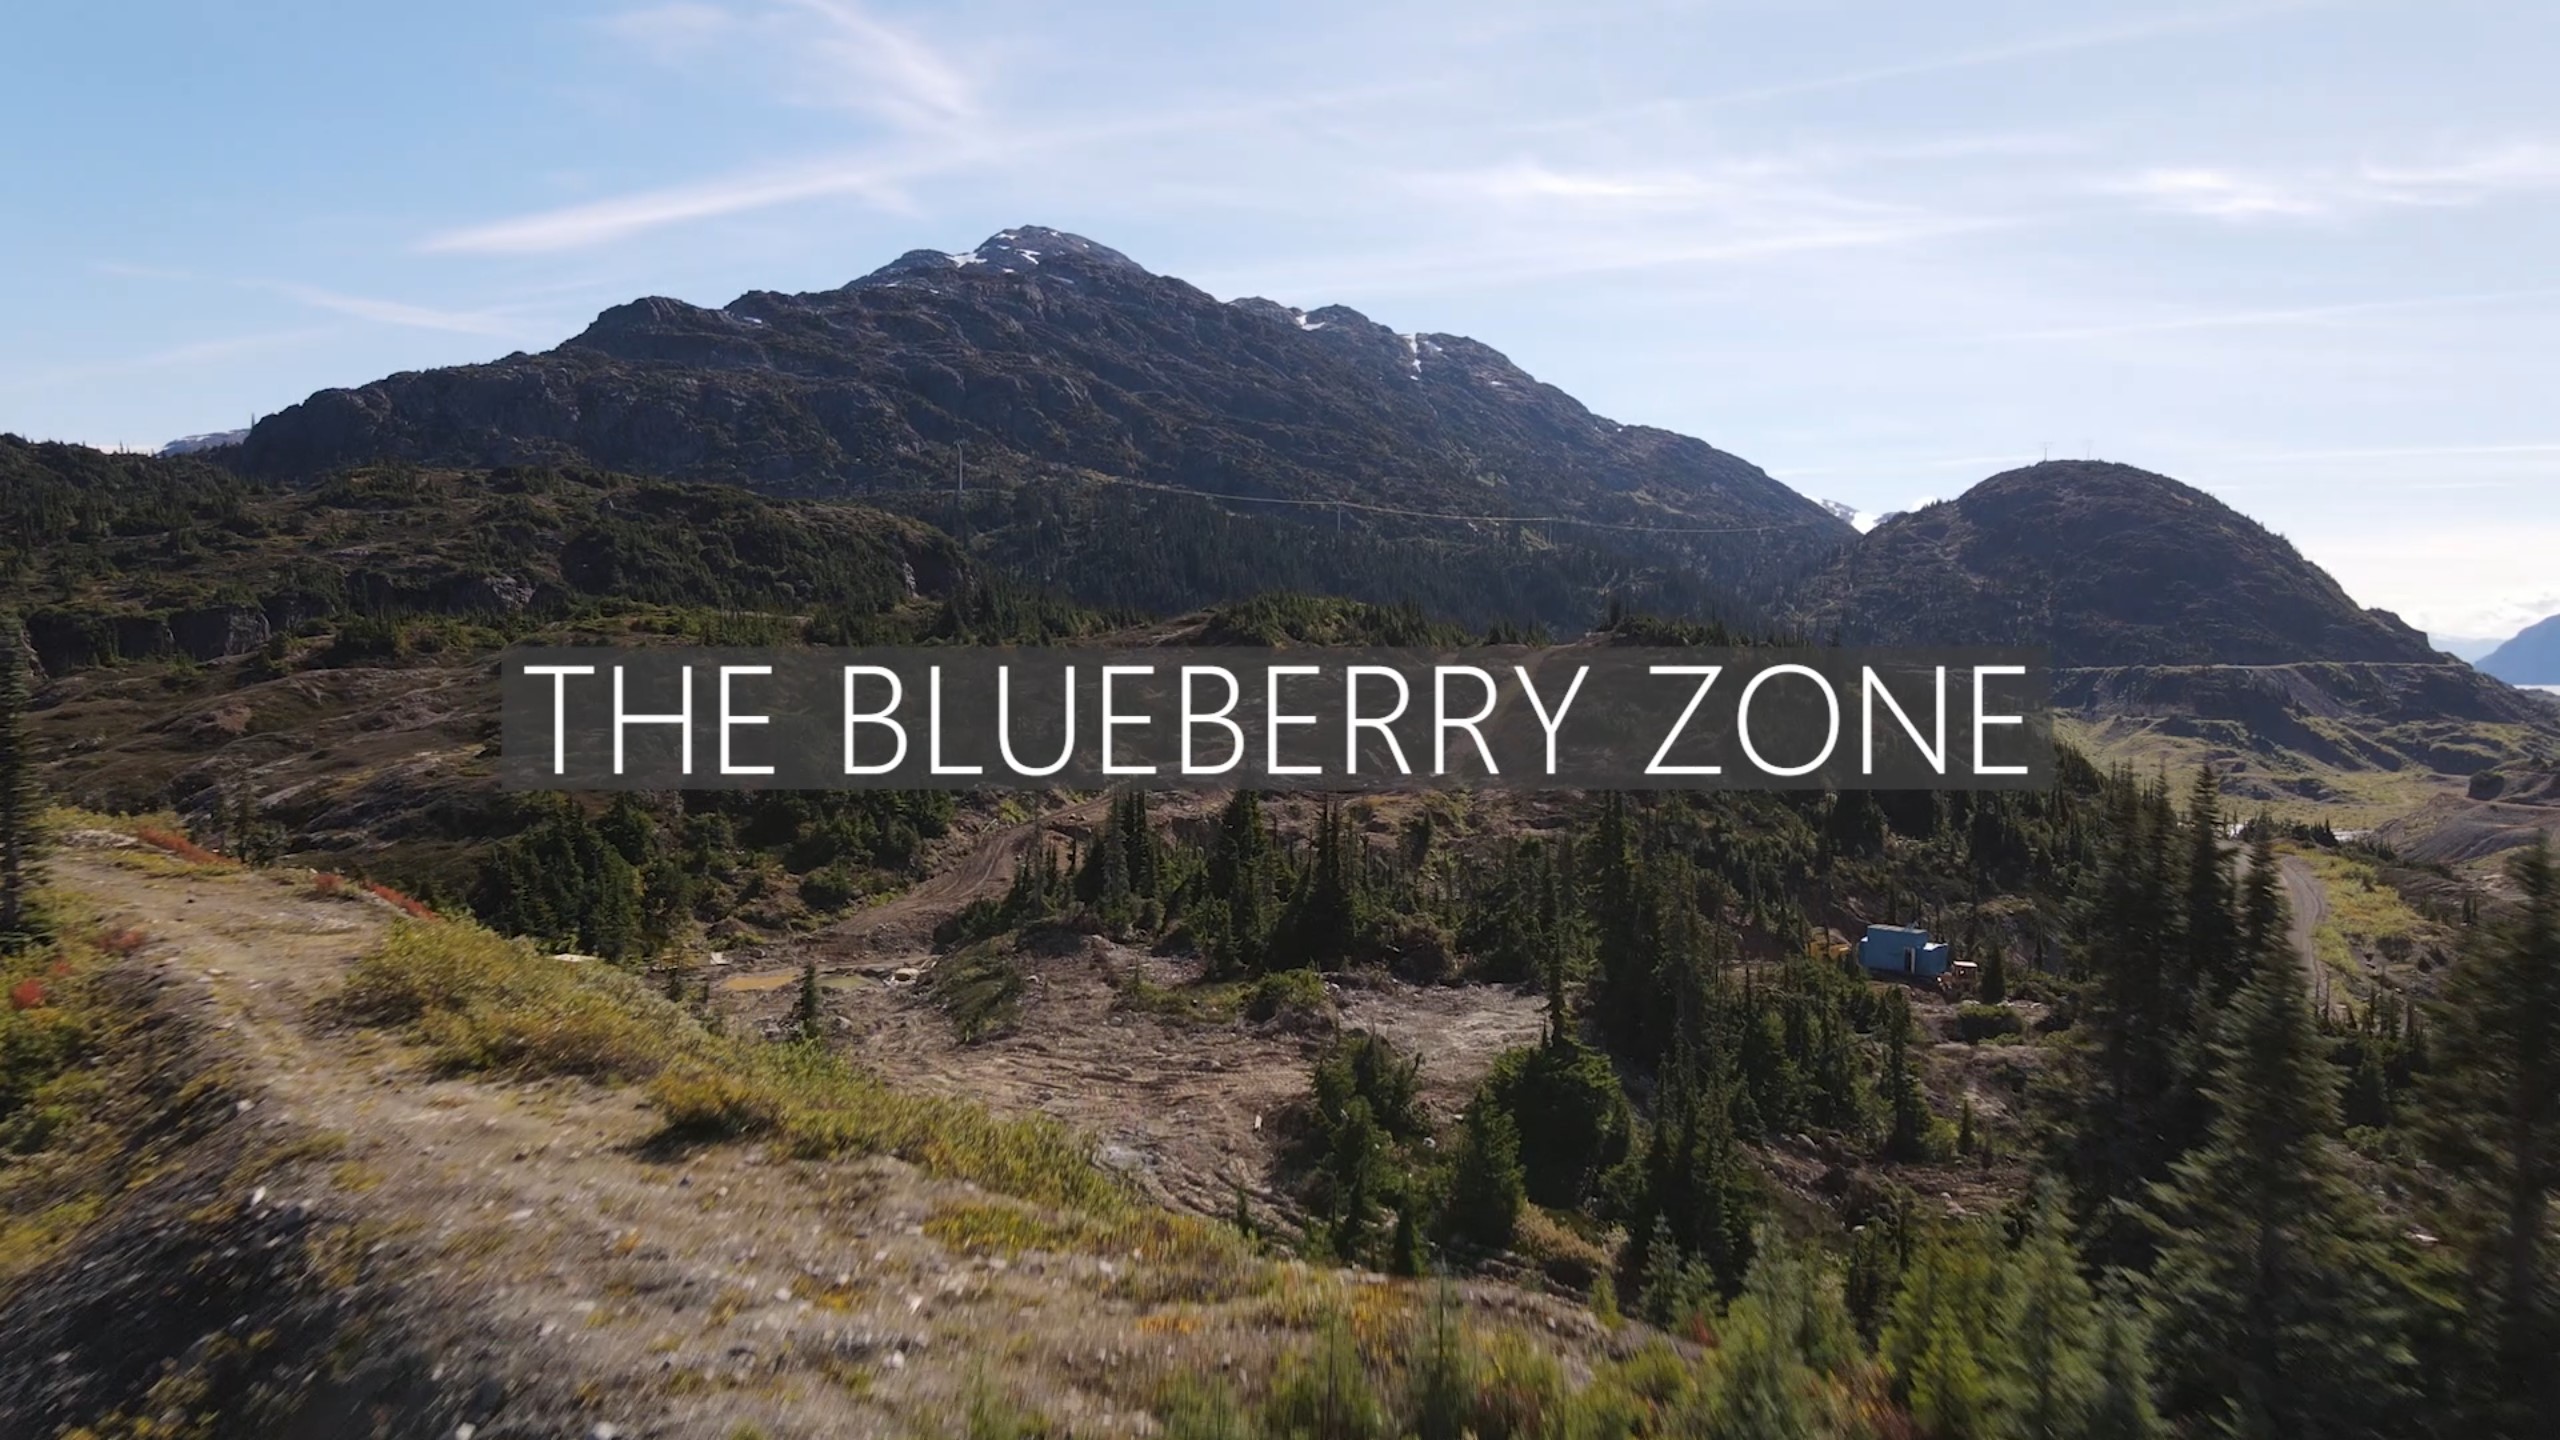 The Blueberry Zone